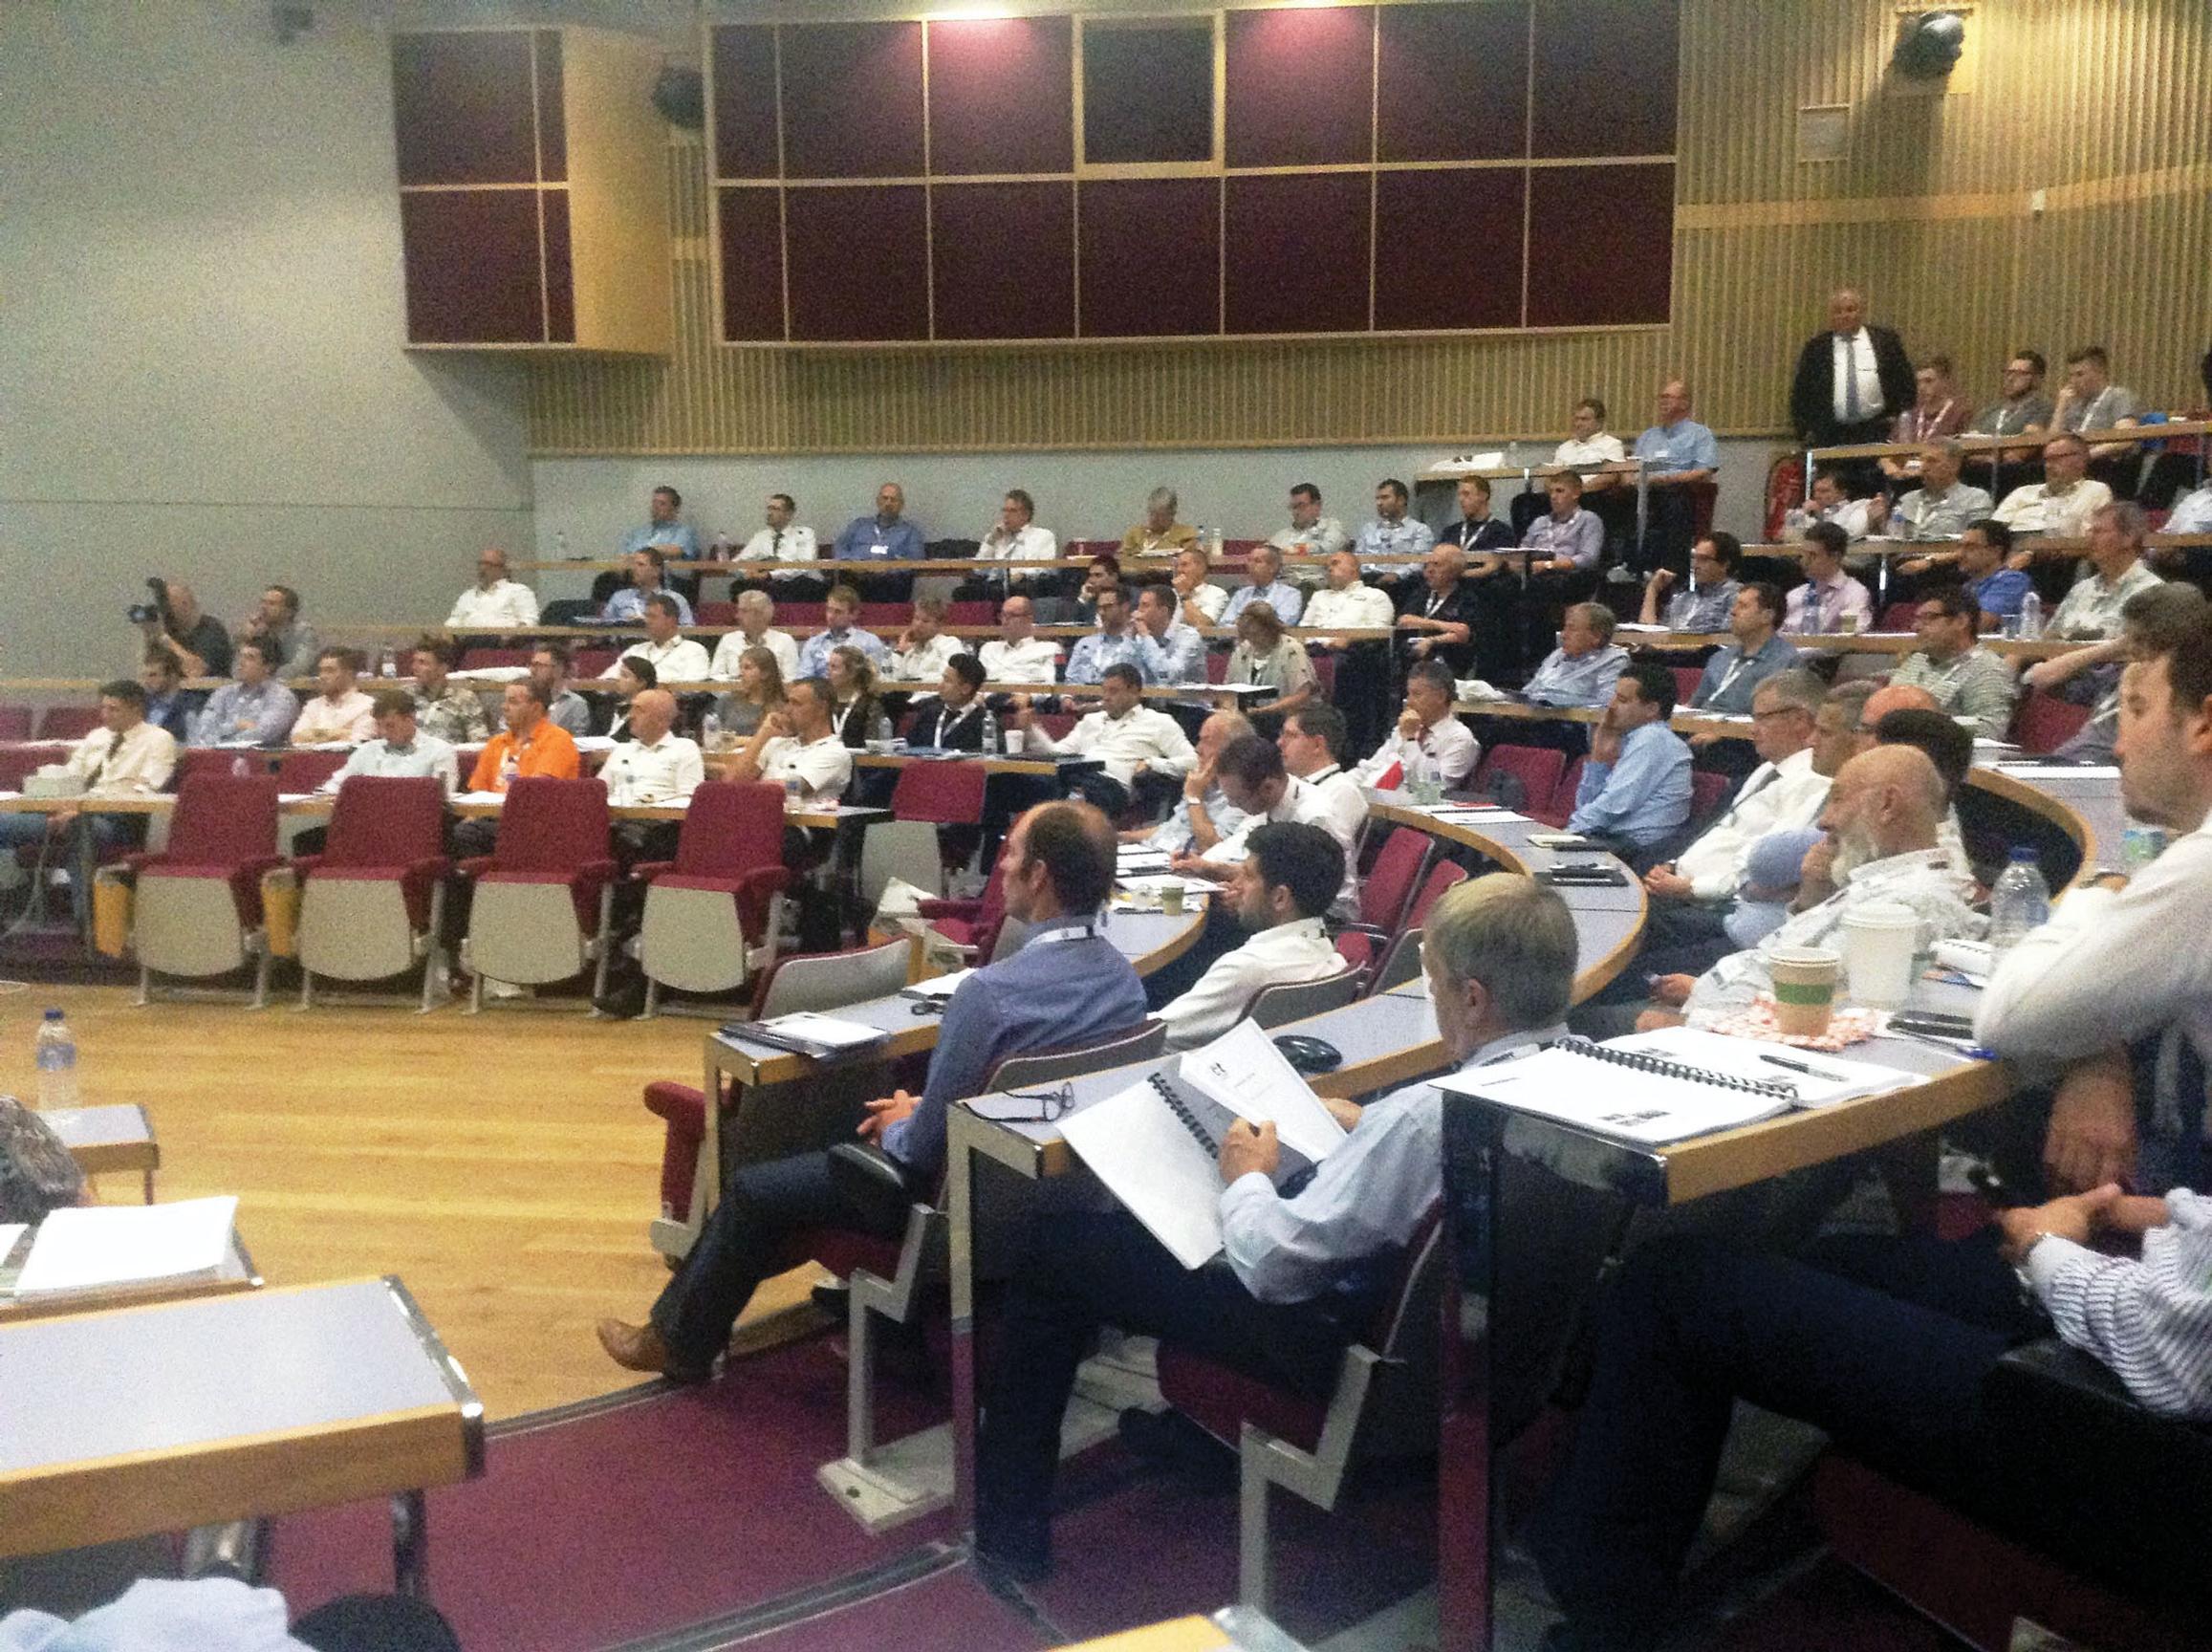 The JCT Traffic Signals symposium was held at the University of Warwick